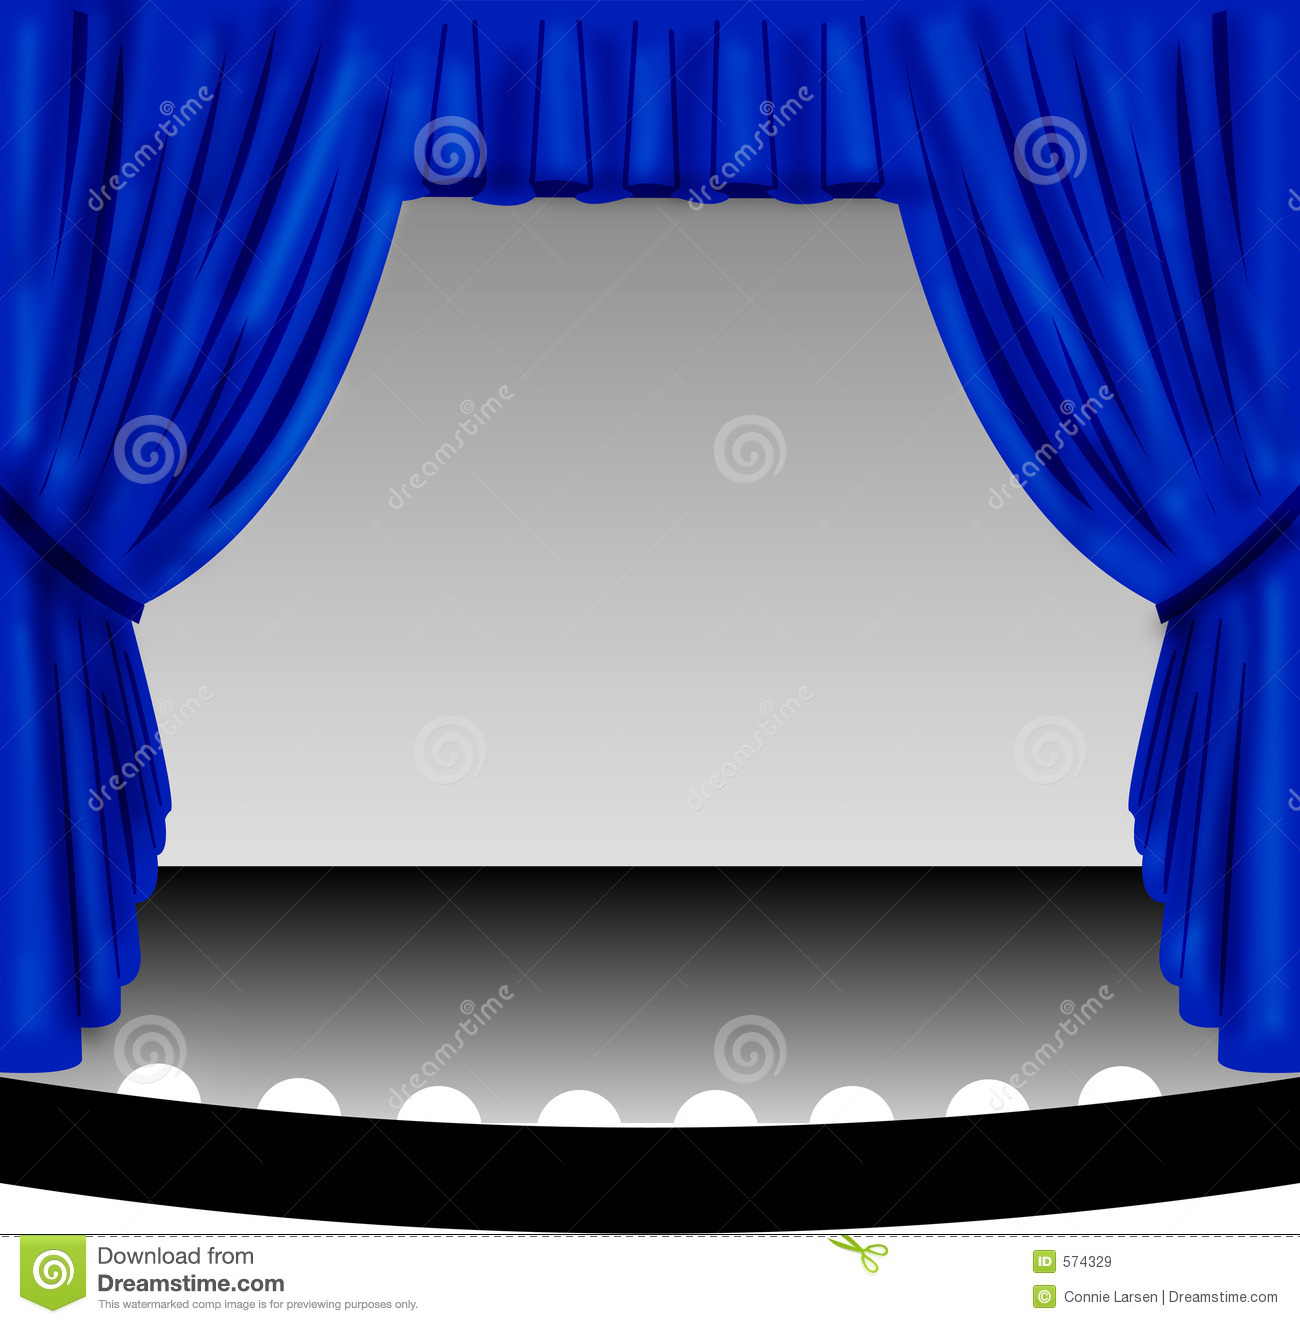 Blue Stage Curtain Royalty Free Stock Images   Image  574329